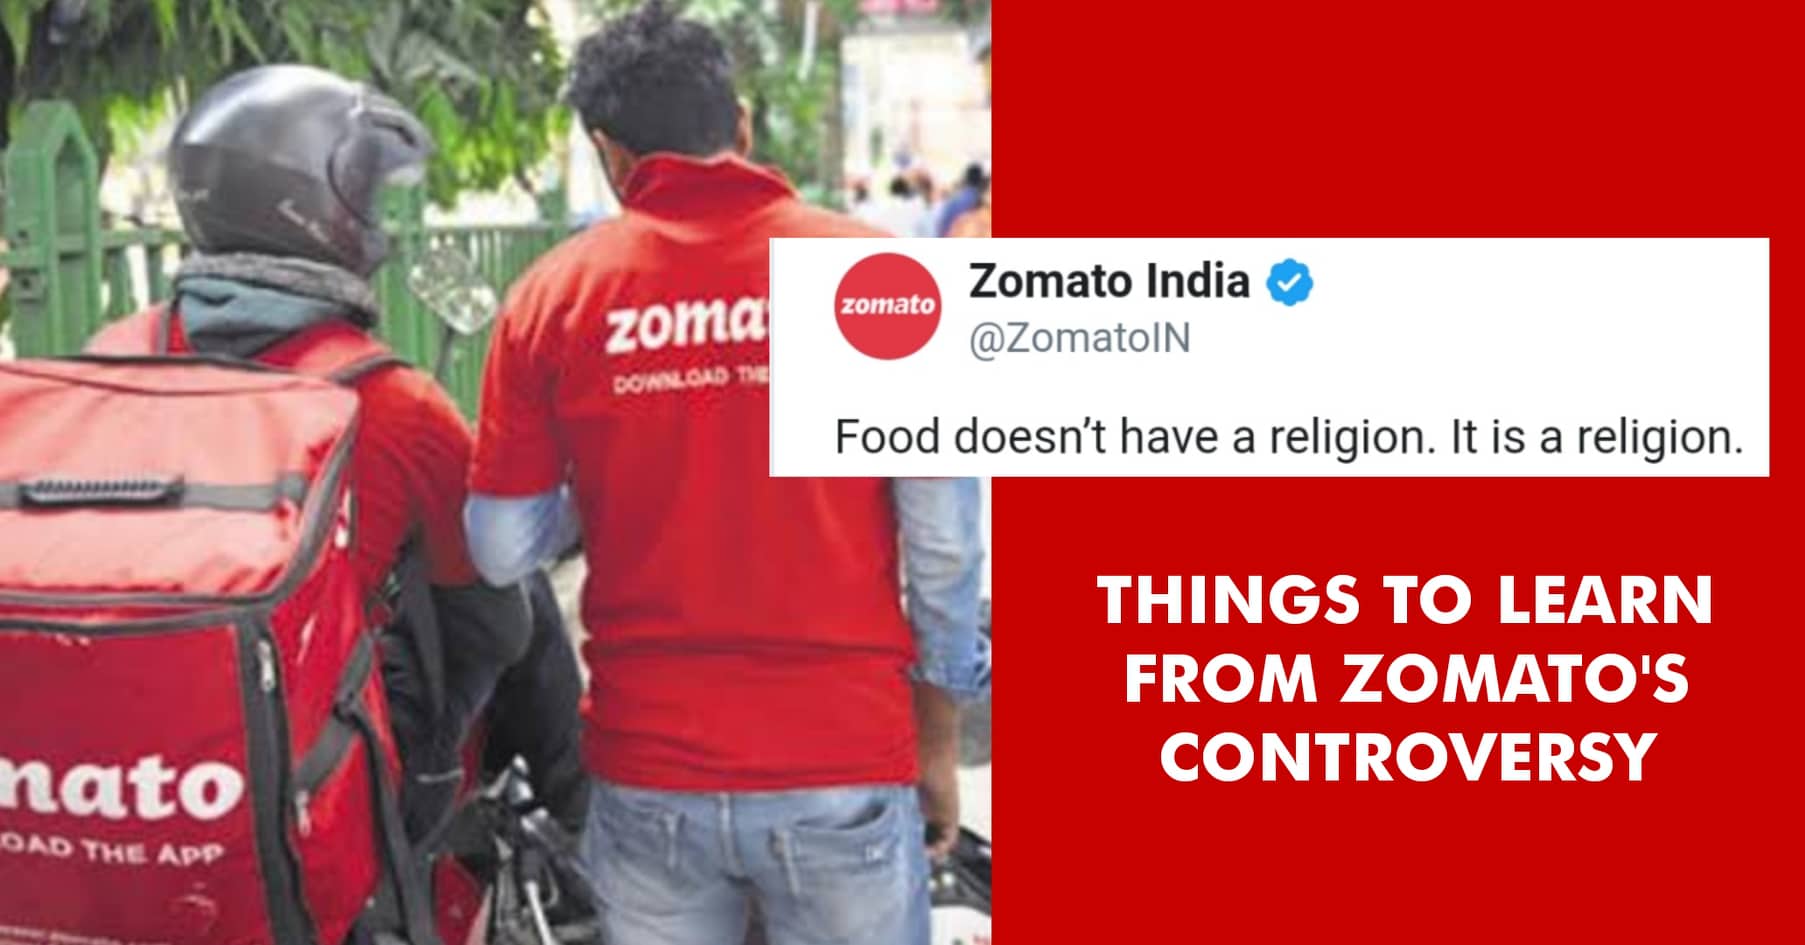 #BoycottZomato: Marketing Lessons To Learn From Zomato's Controversy On